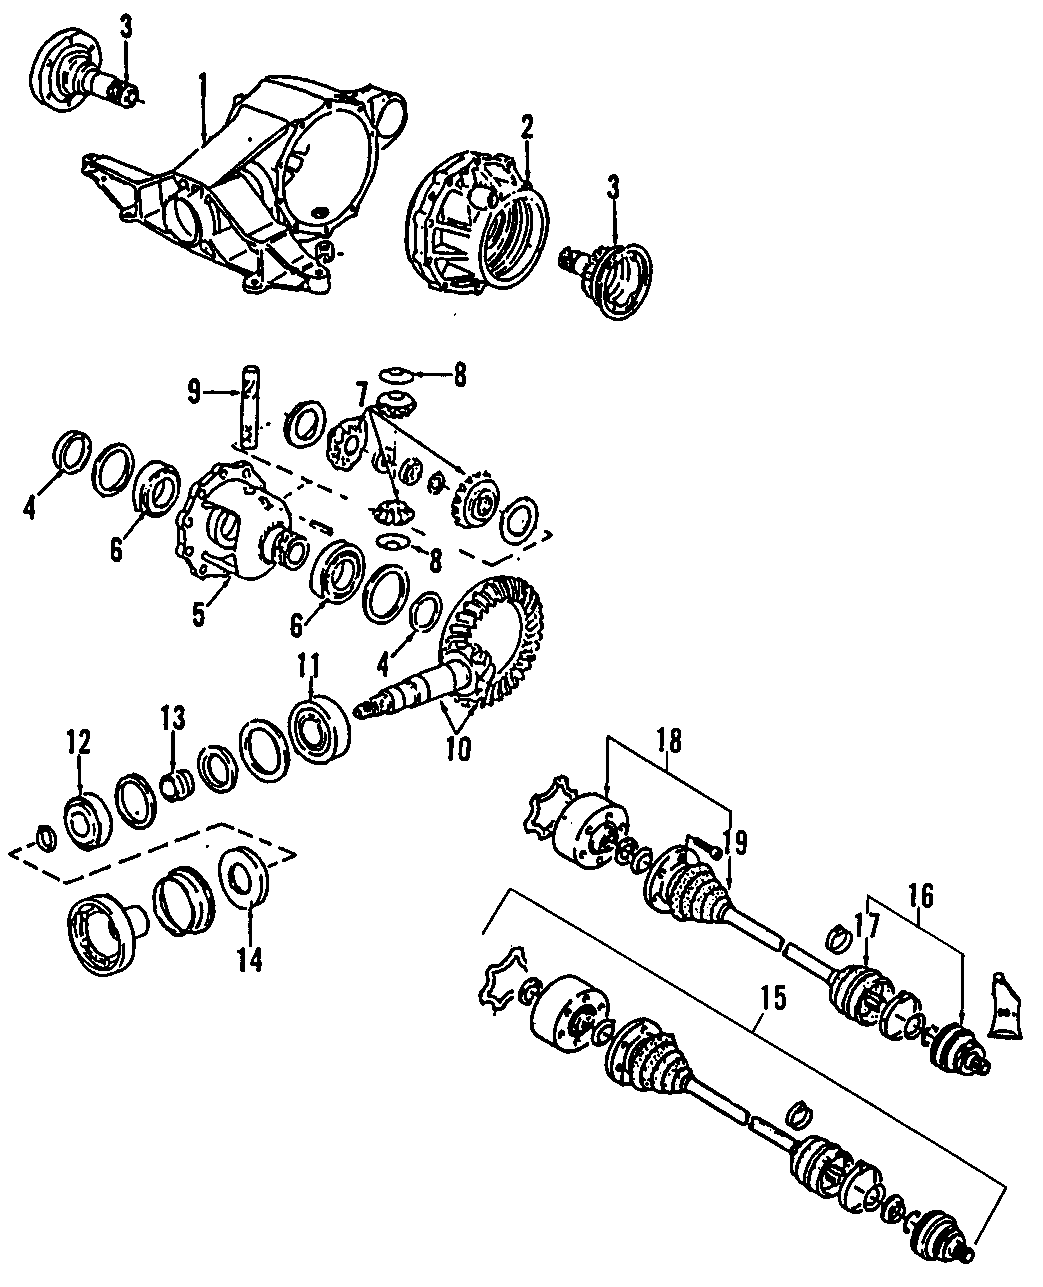 2DRIVE AXLES. REAR AXLE. AXLE SHAFTS & JOINTS. DIFFERENTIAL. PROPELLER SHAFT.https://images.simplepart.com/images/parts/motor/fullsize/F207090.png